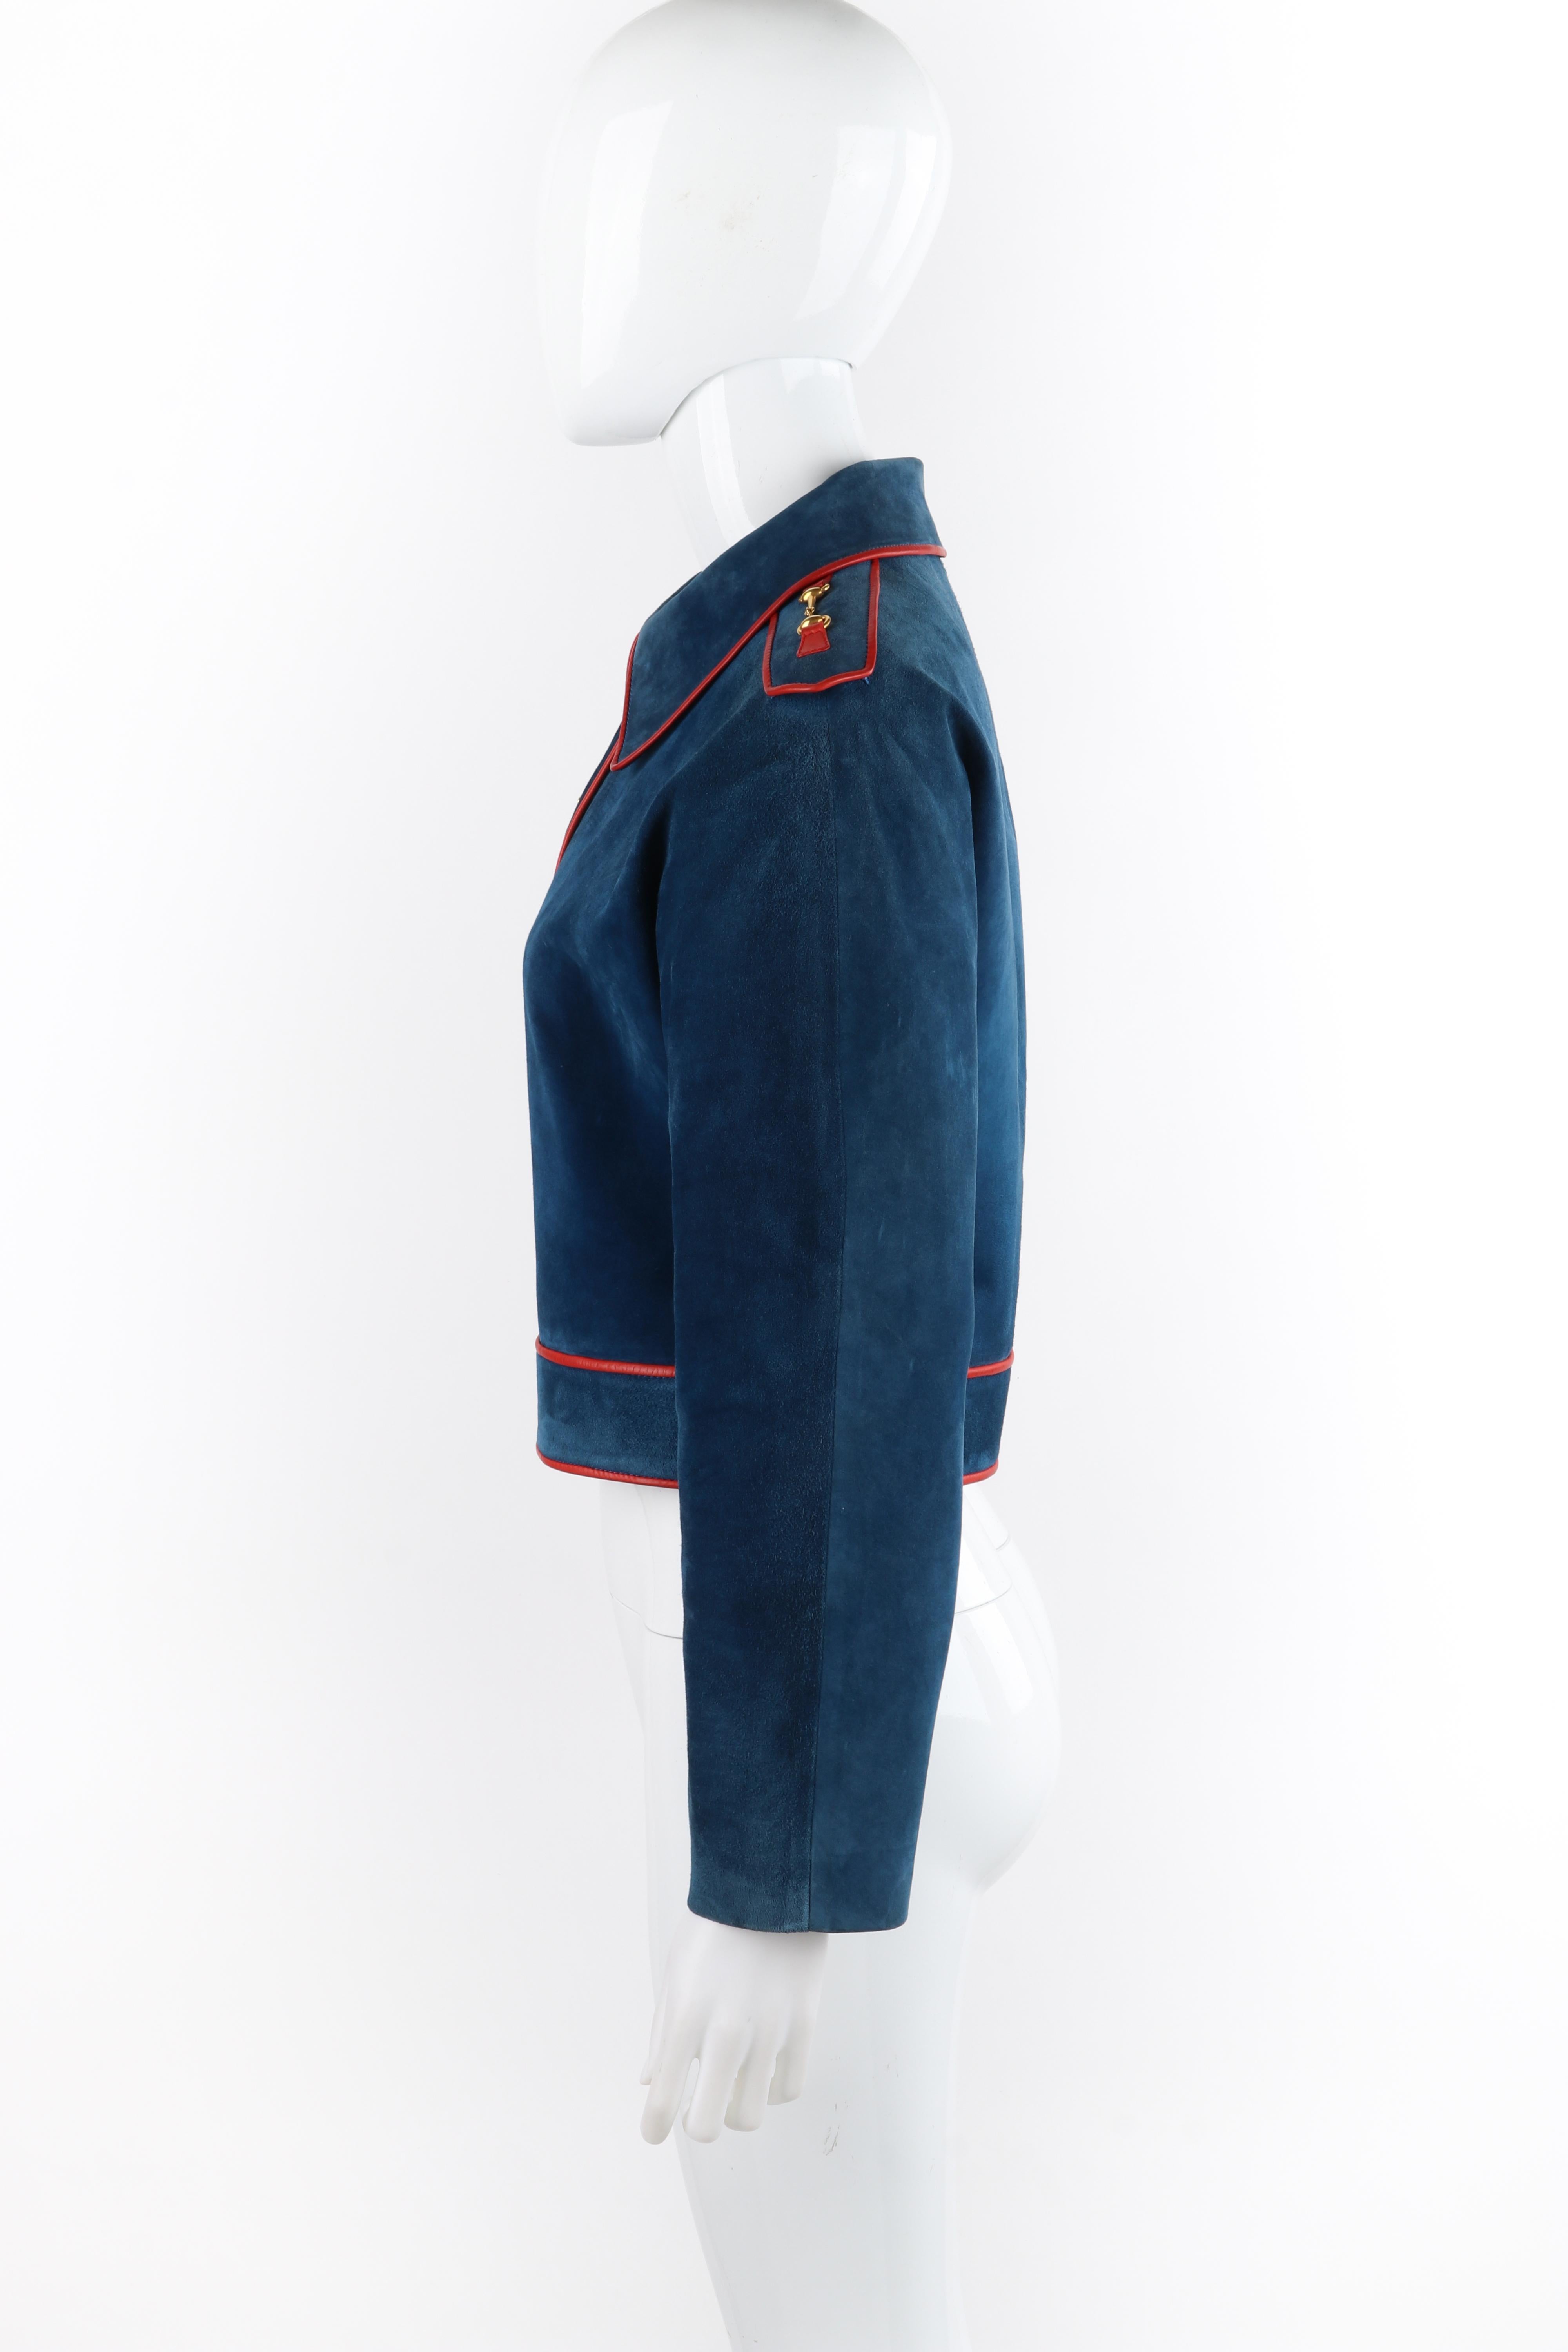 Black GUCCI c.1970s Blue Red Suede Leather Trim Horse Bit Button-Up Cropped Jacket For Sale